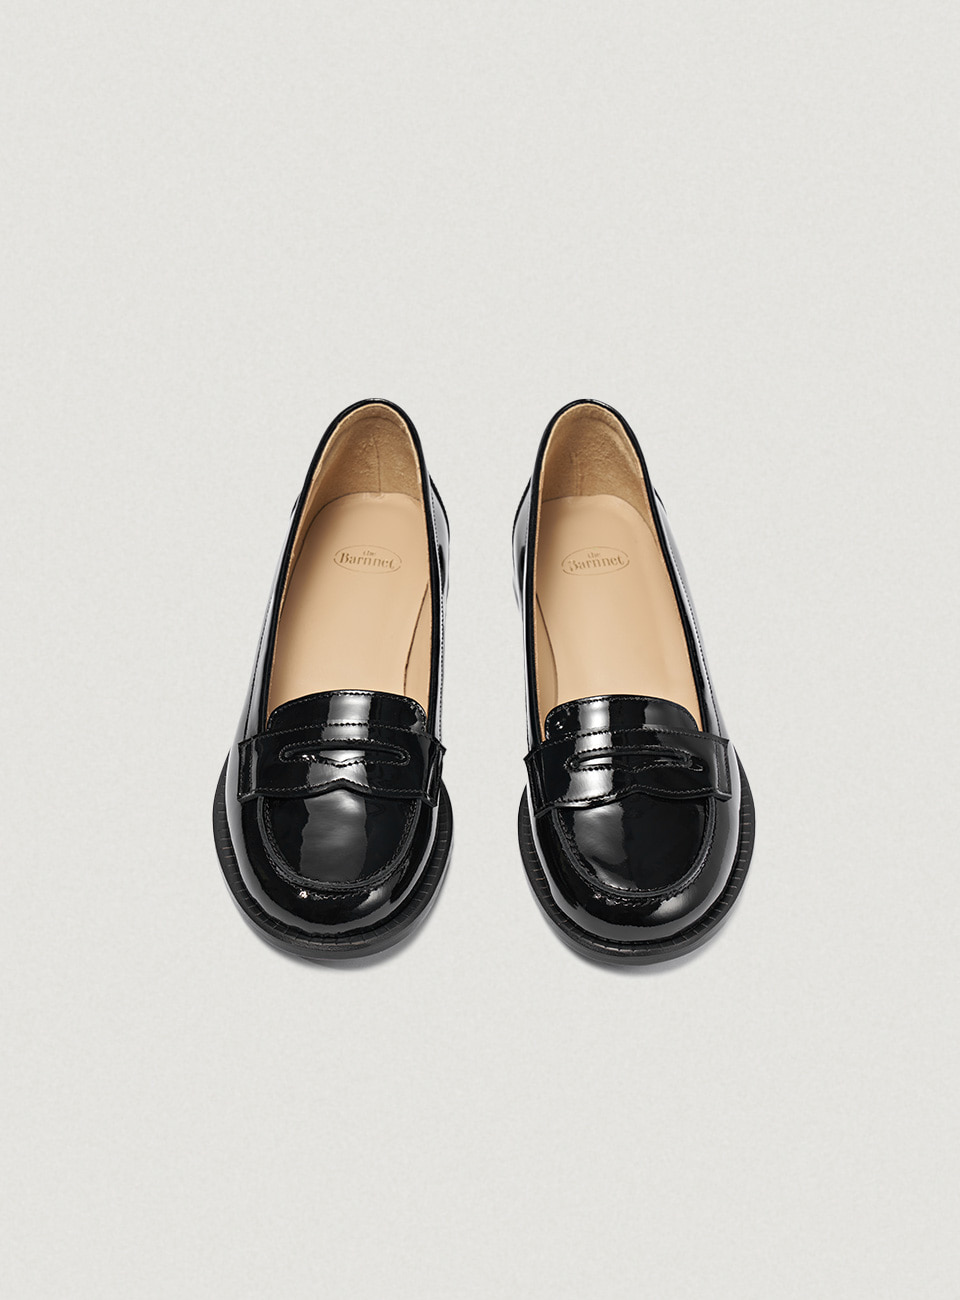 Black Patent Leather Pump Penny Loafers